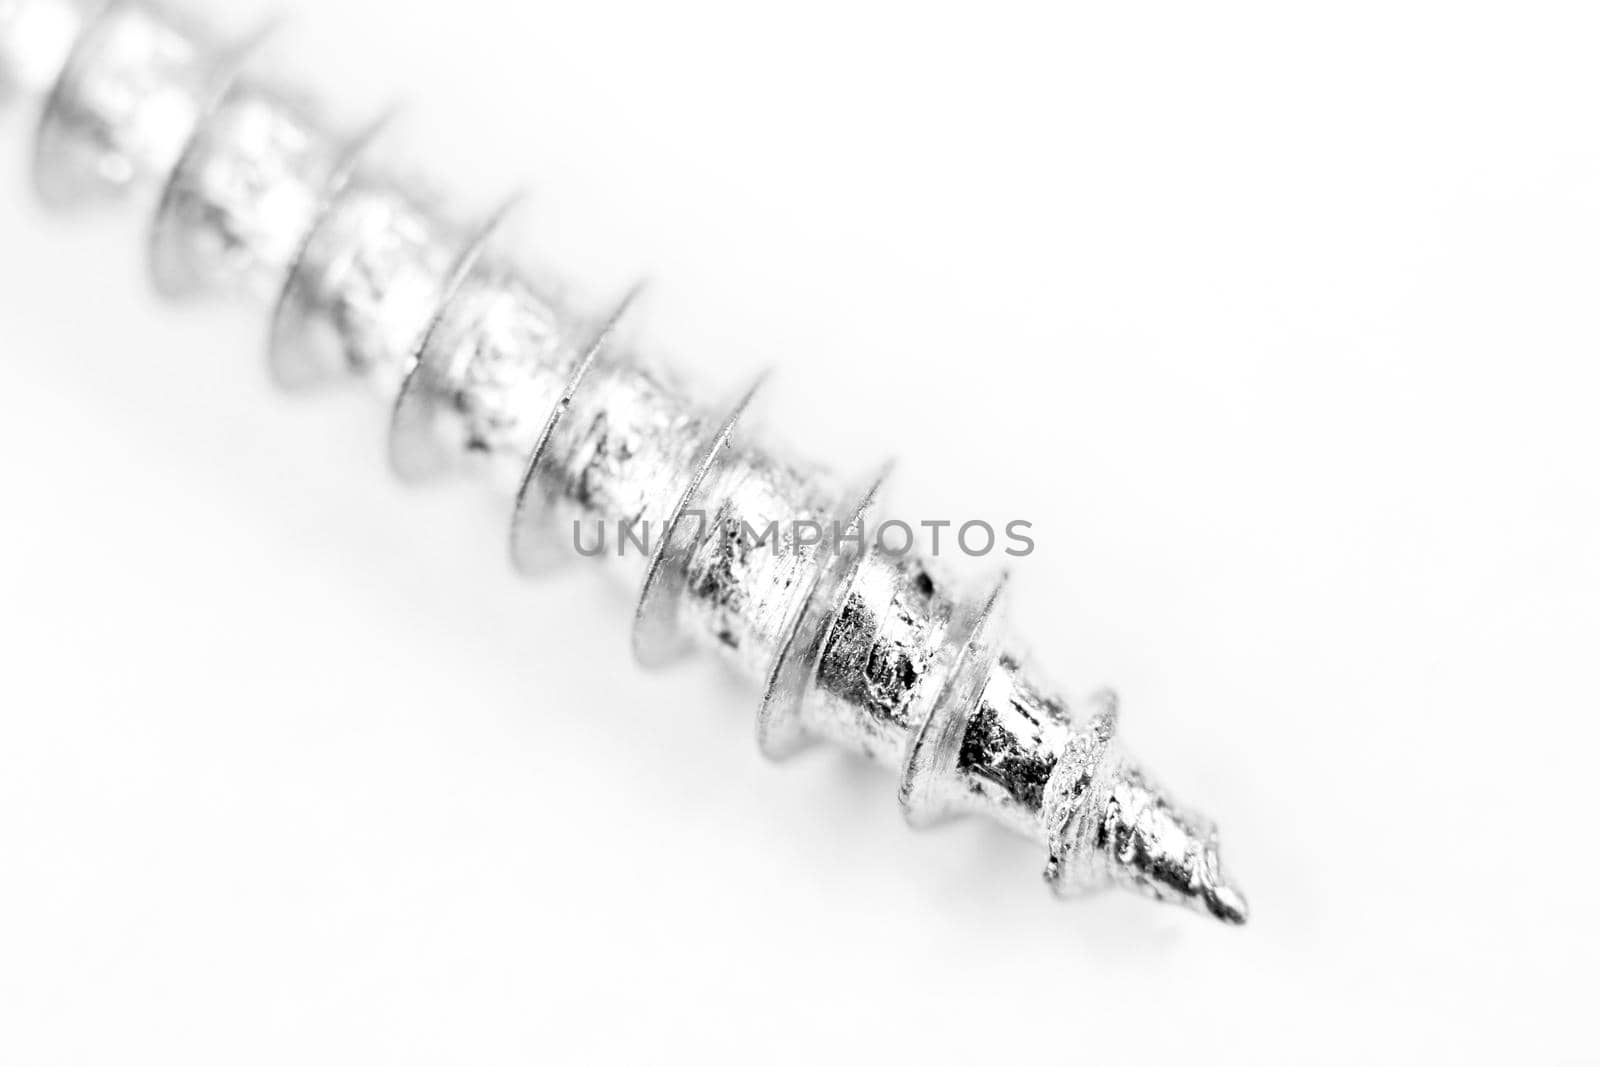 Photography of external screw thread on white background by soniabonet